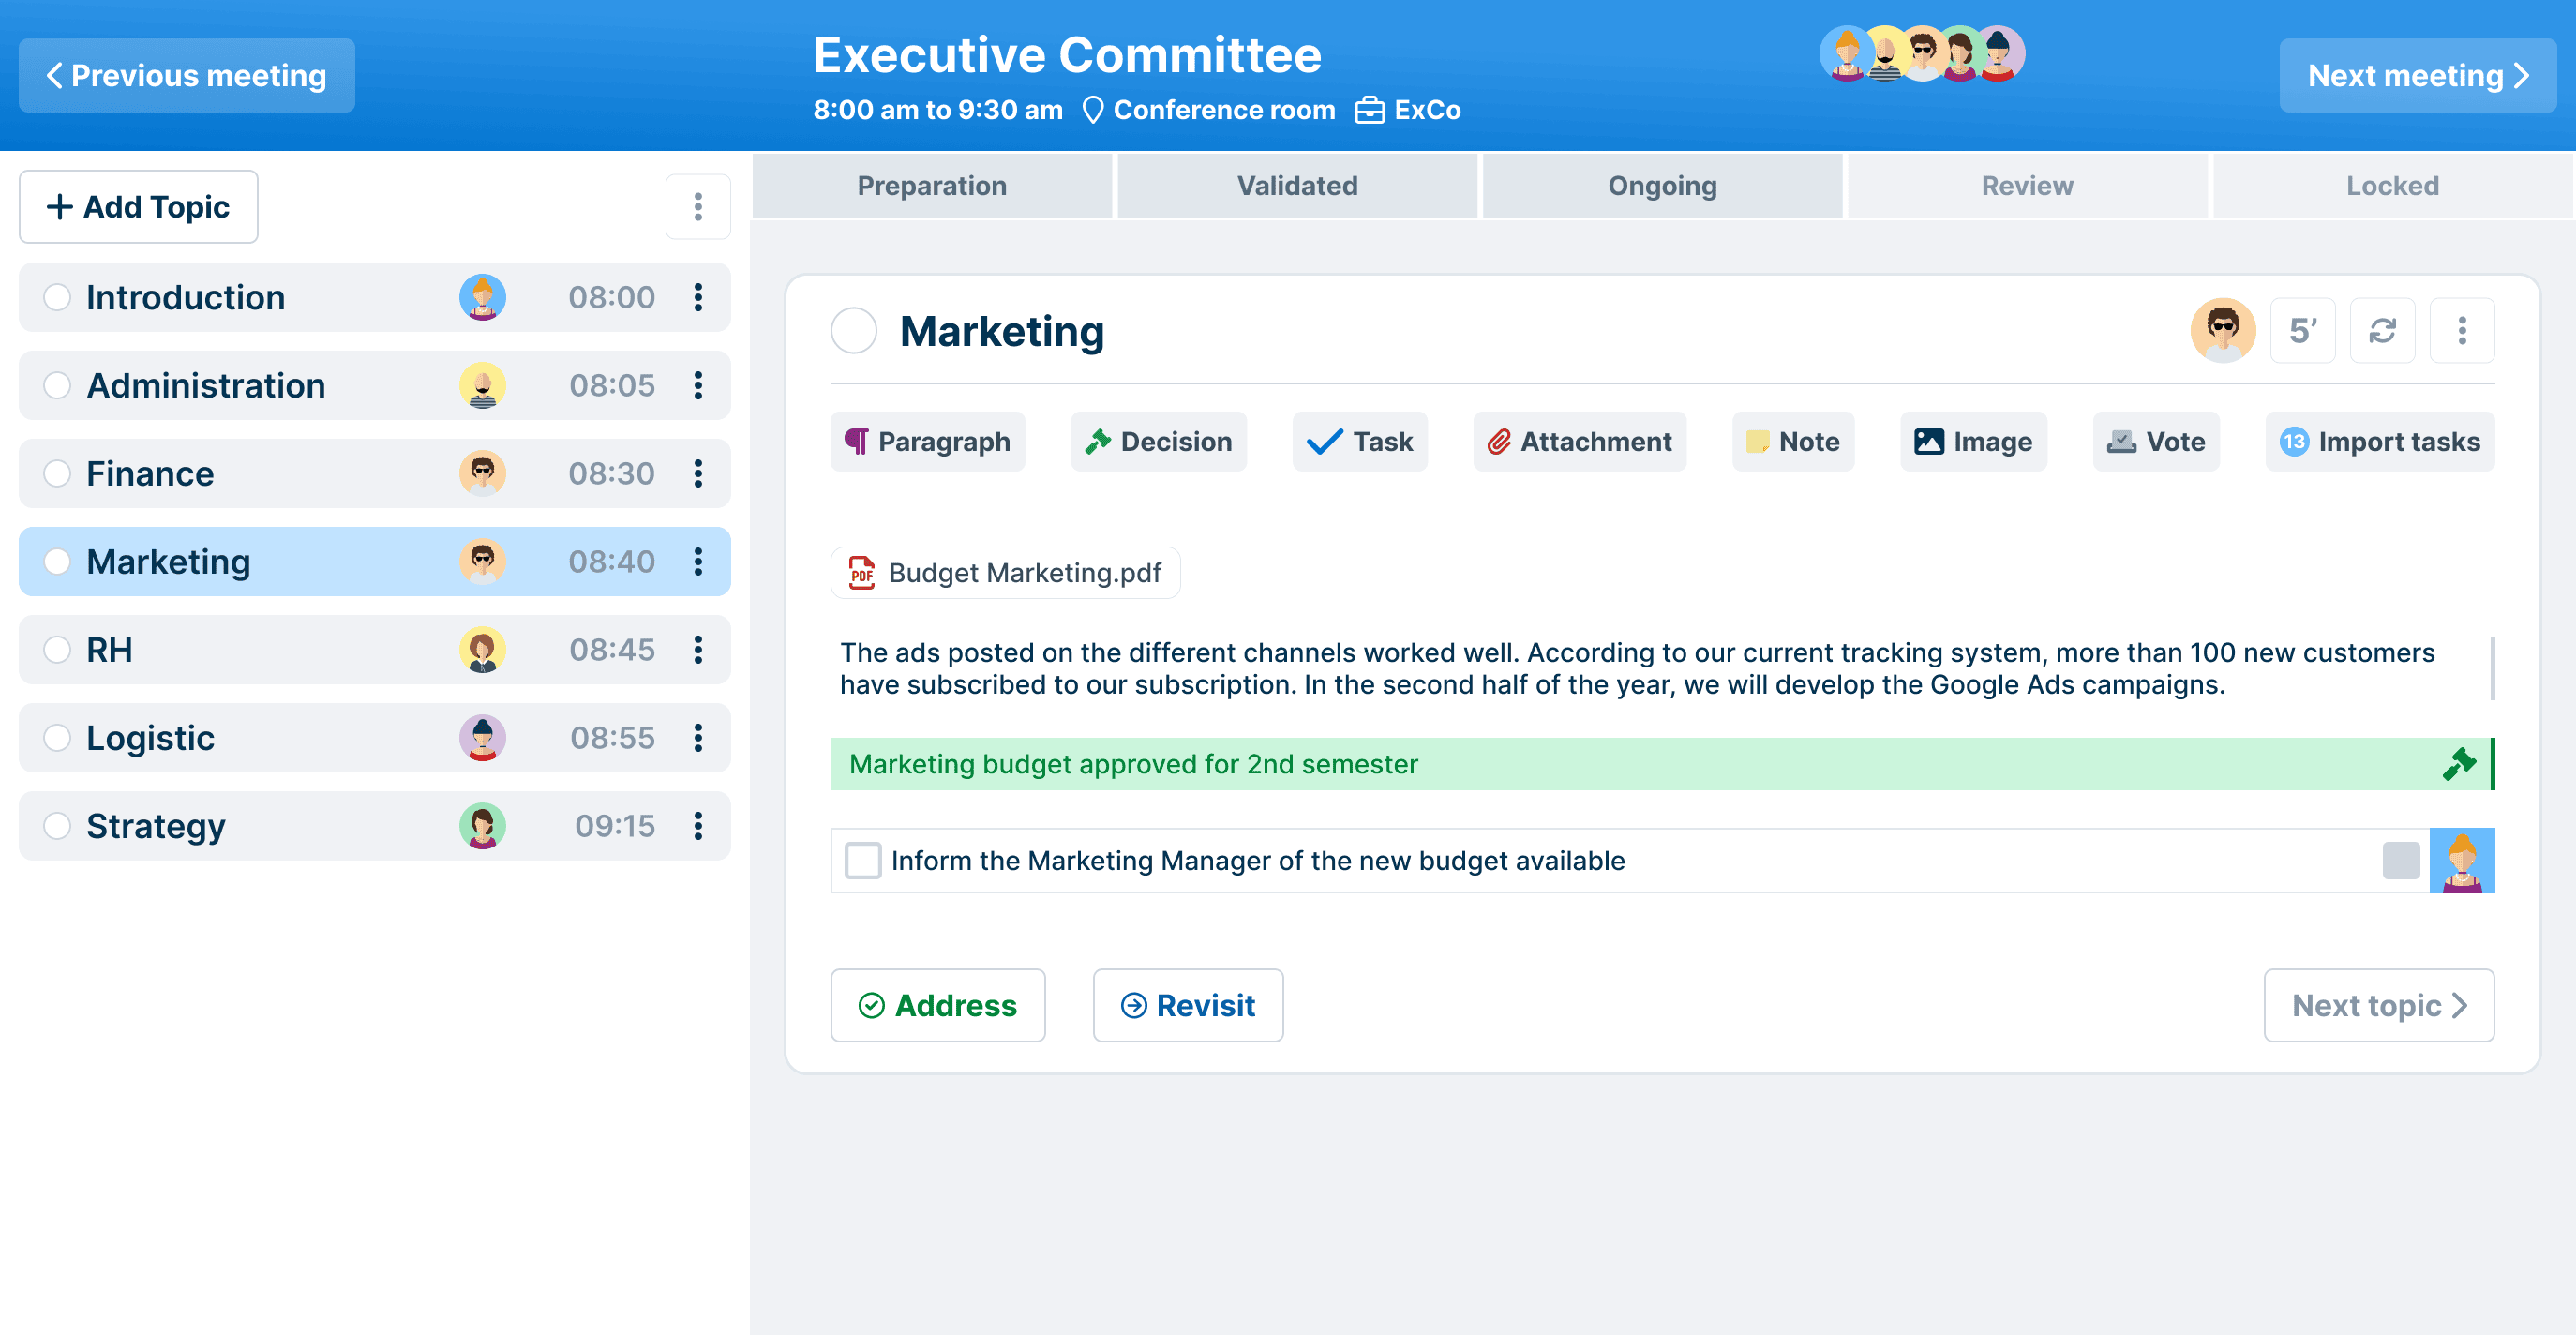 WEDO screen for the executive committee with navigation by theme and task tracking